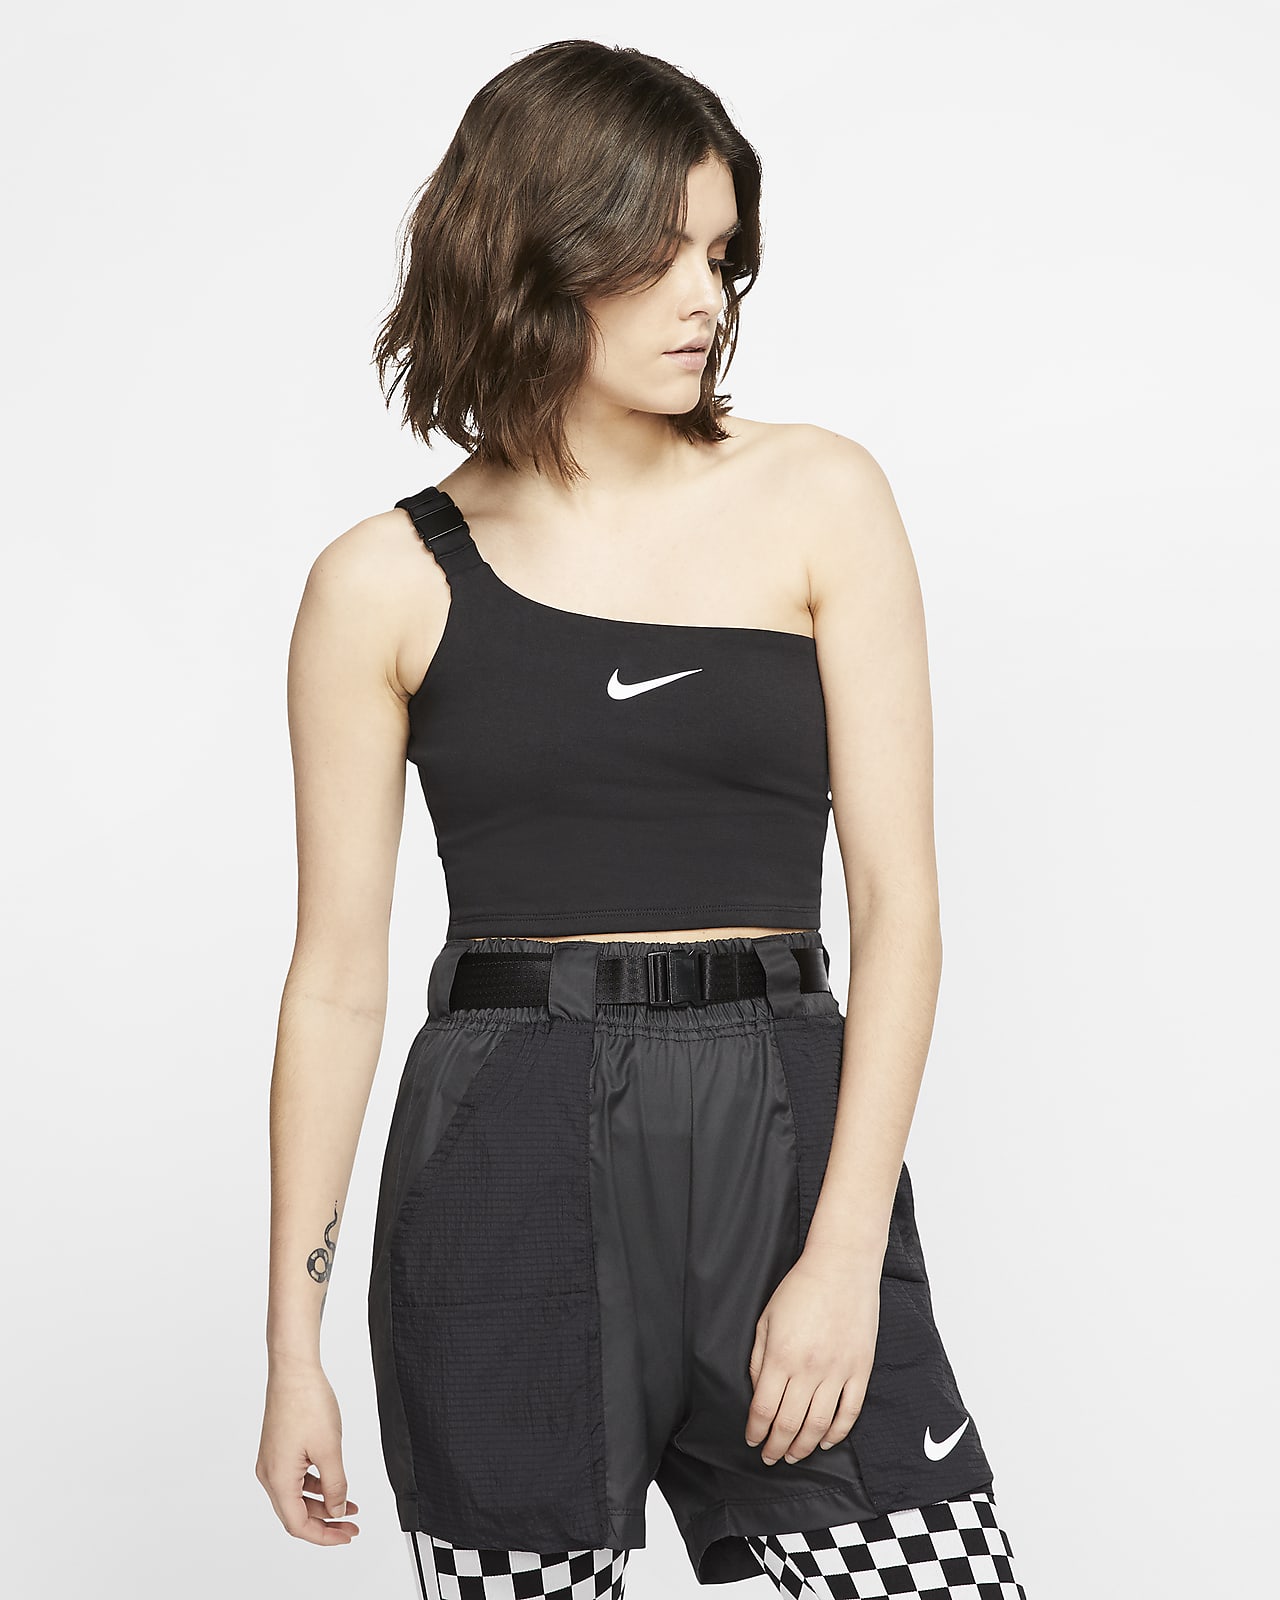 womens nike shorts and top set